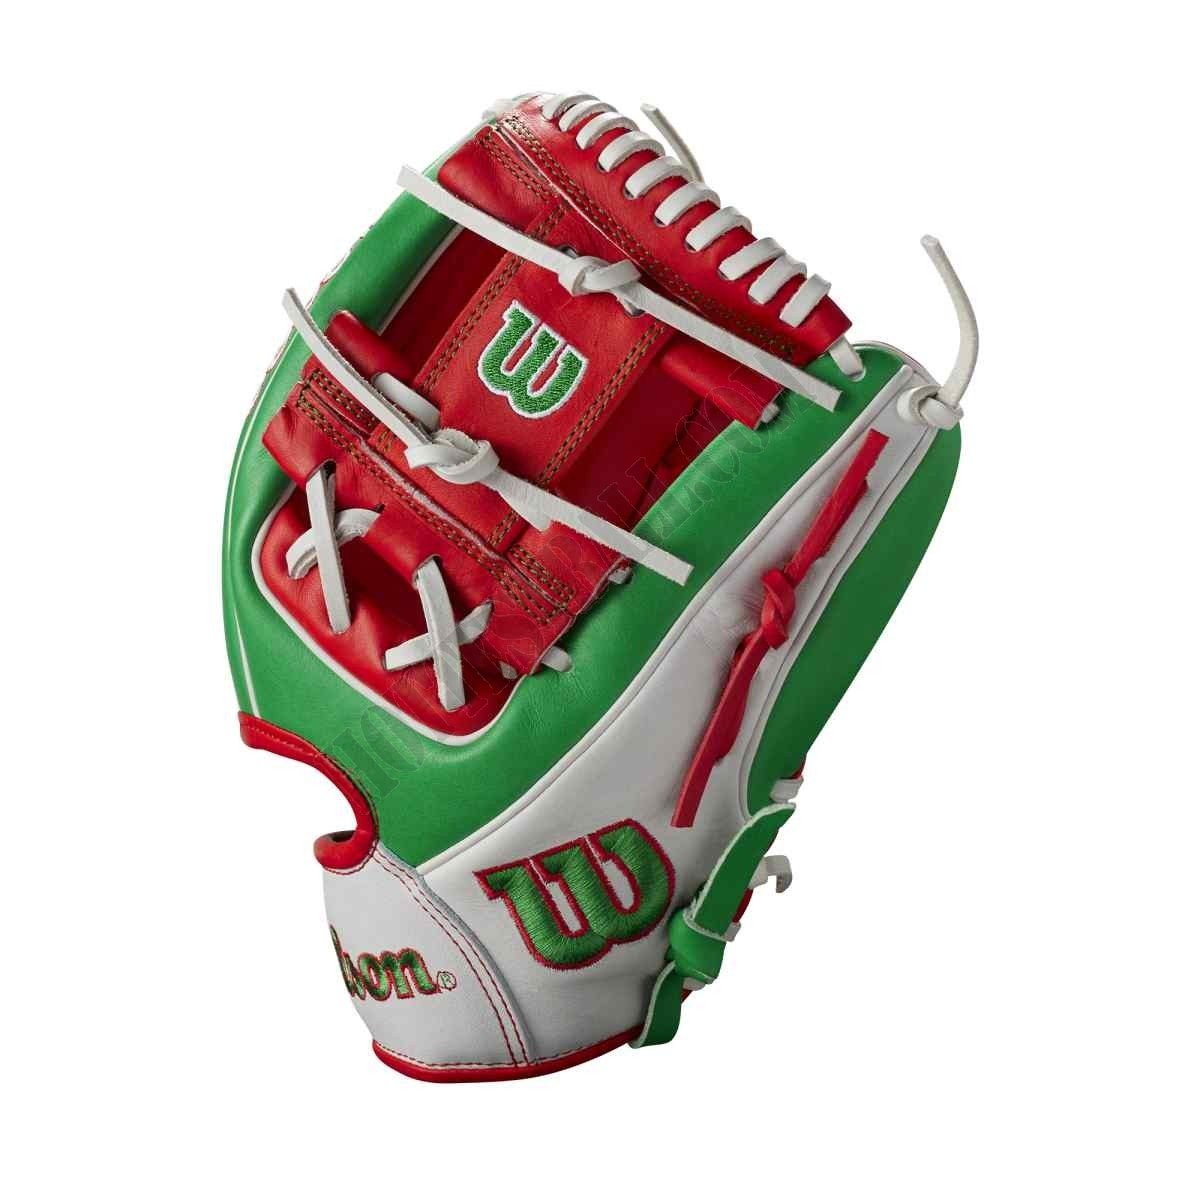 2021 A2000 1786 Mexico 11.5" Infield Baseball Glove - Limited Edition ● Wilson Promotions - -3